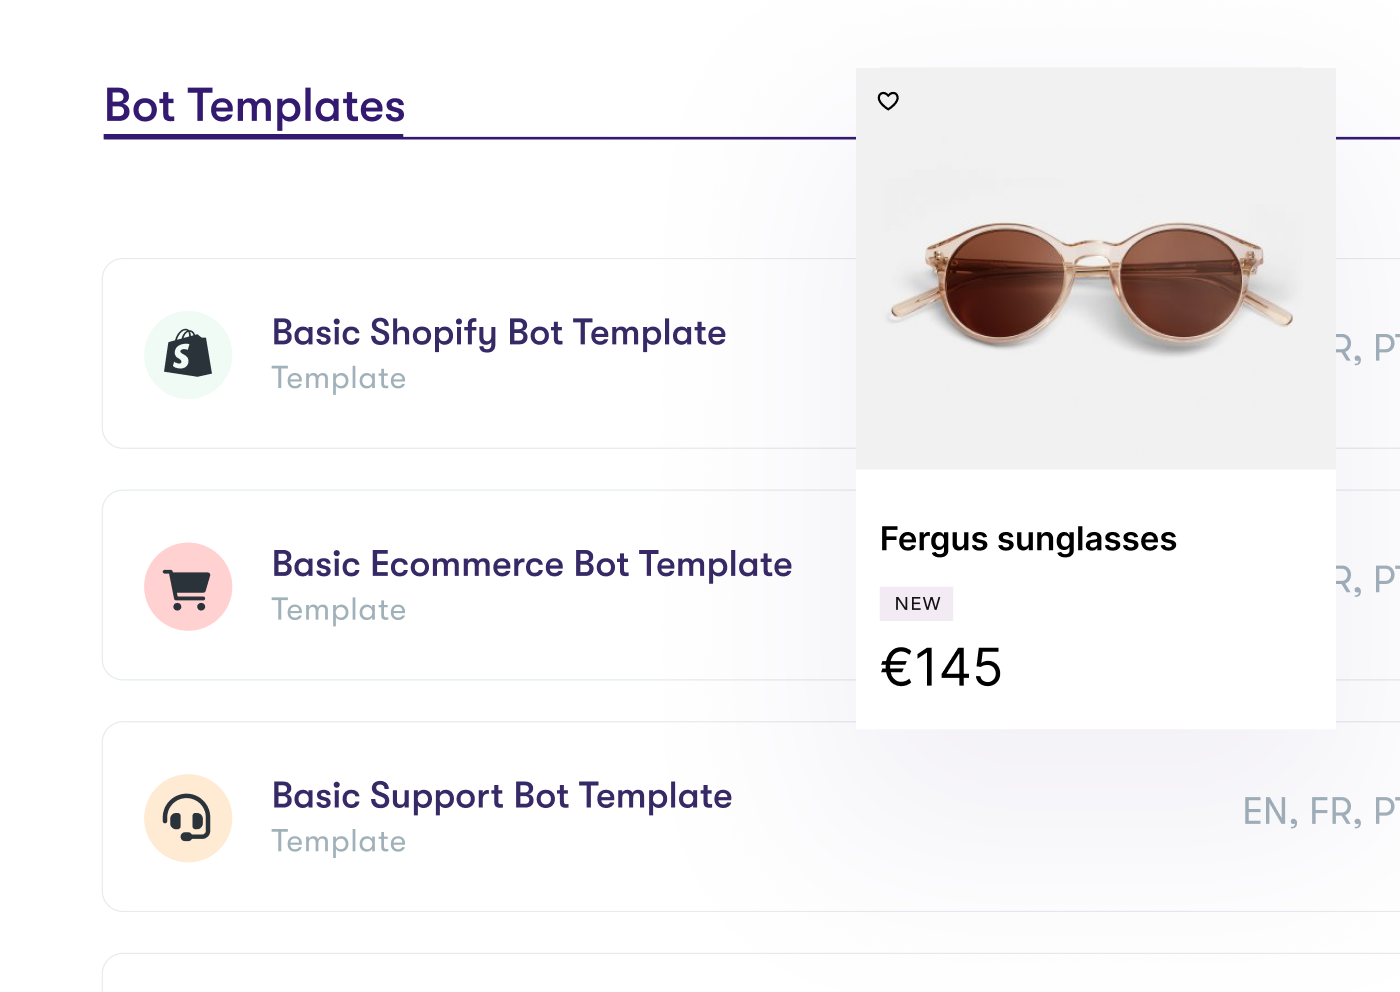 A list of Certainly's chatbot templates for Shopify, Ecommerce, and Support. A product card for a pair of sunglasses is overlaid.